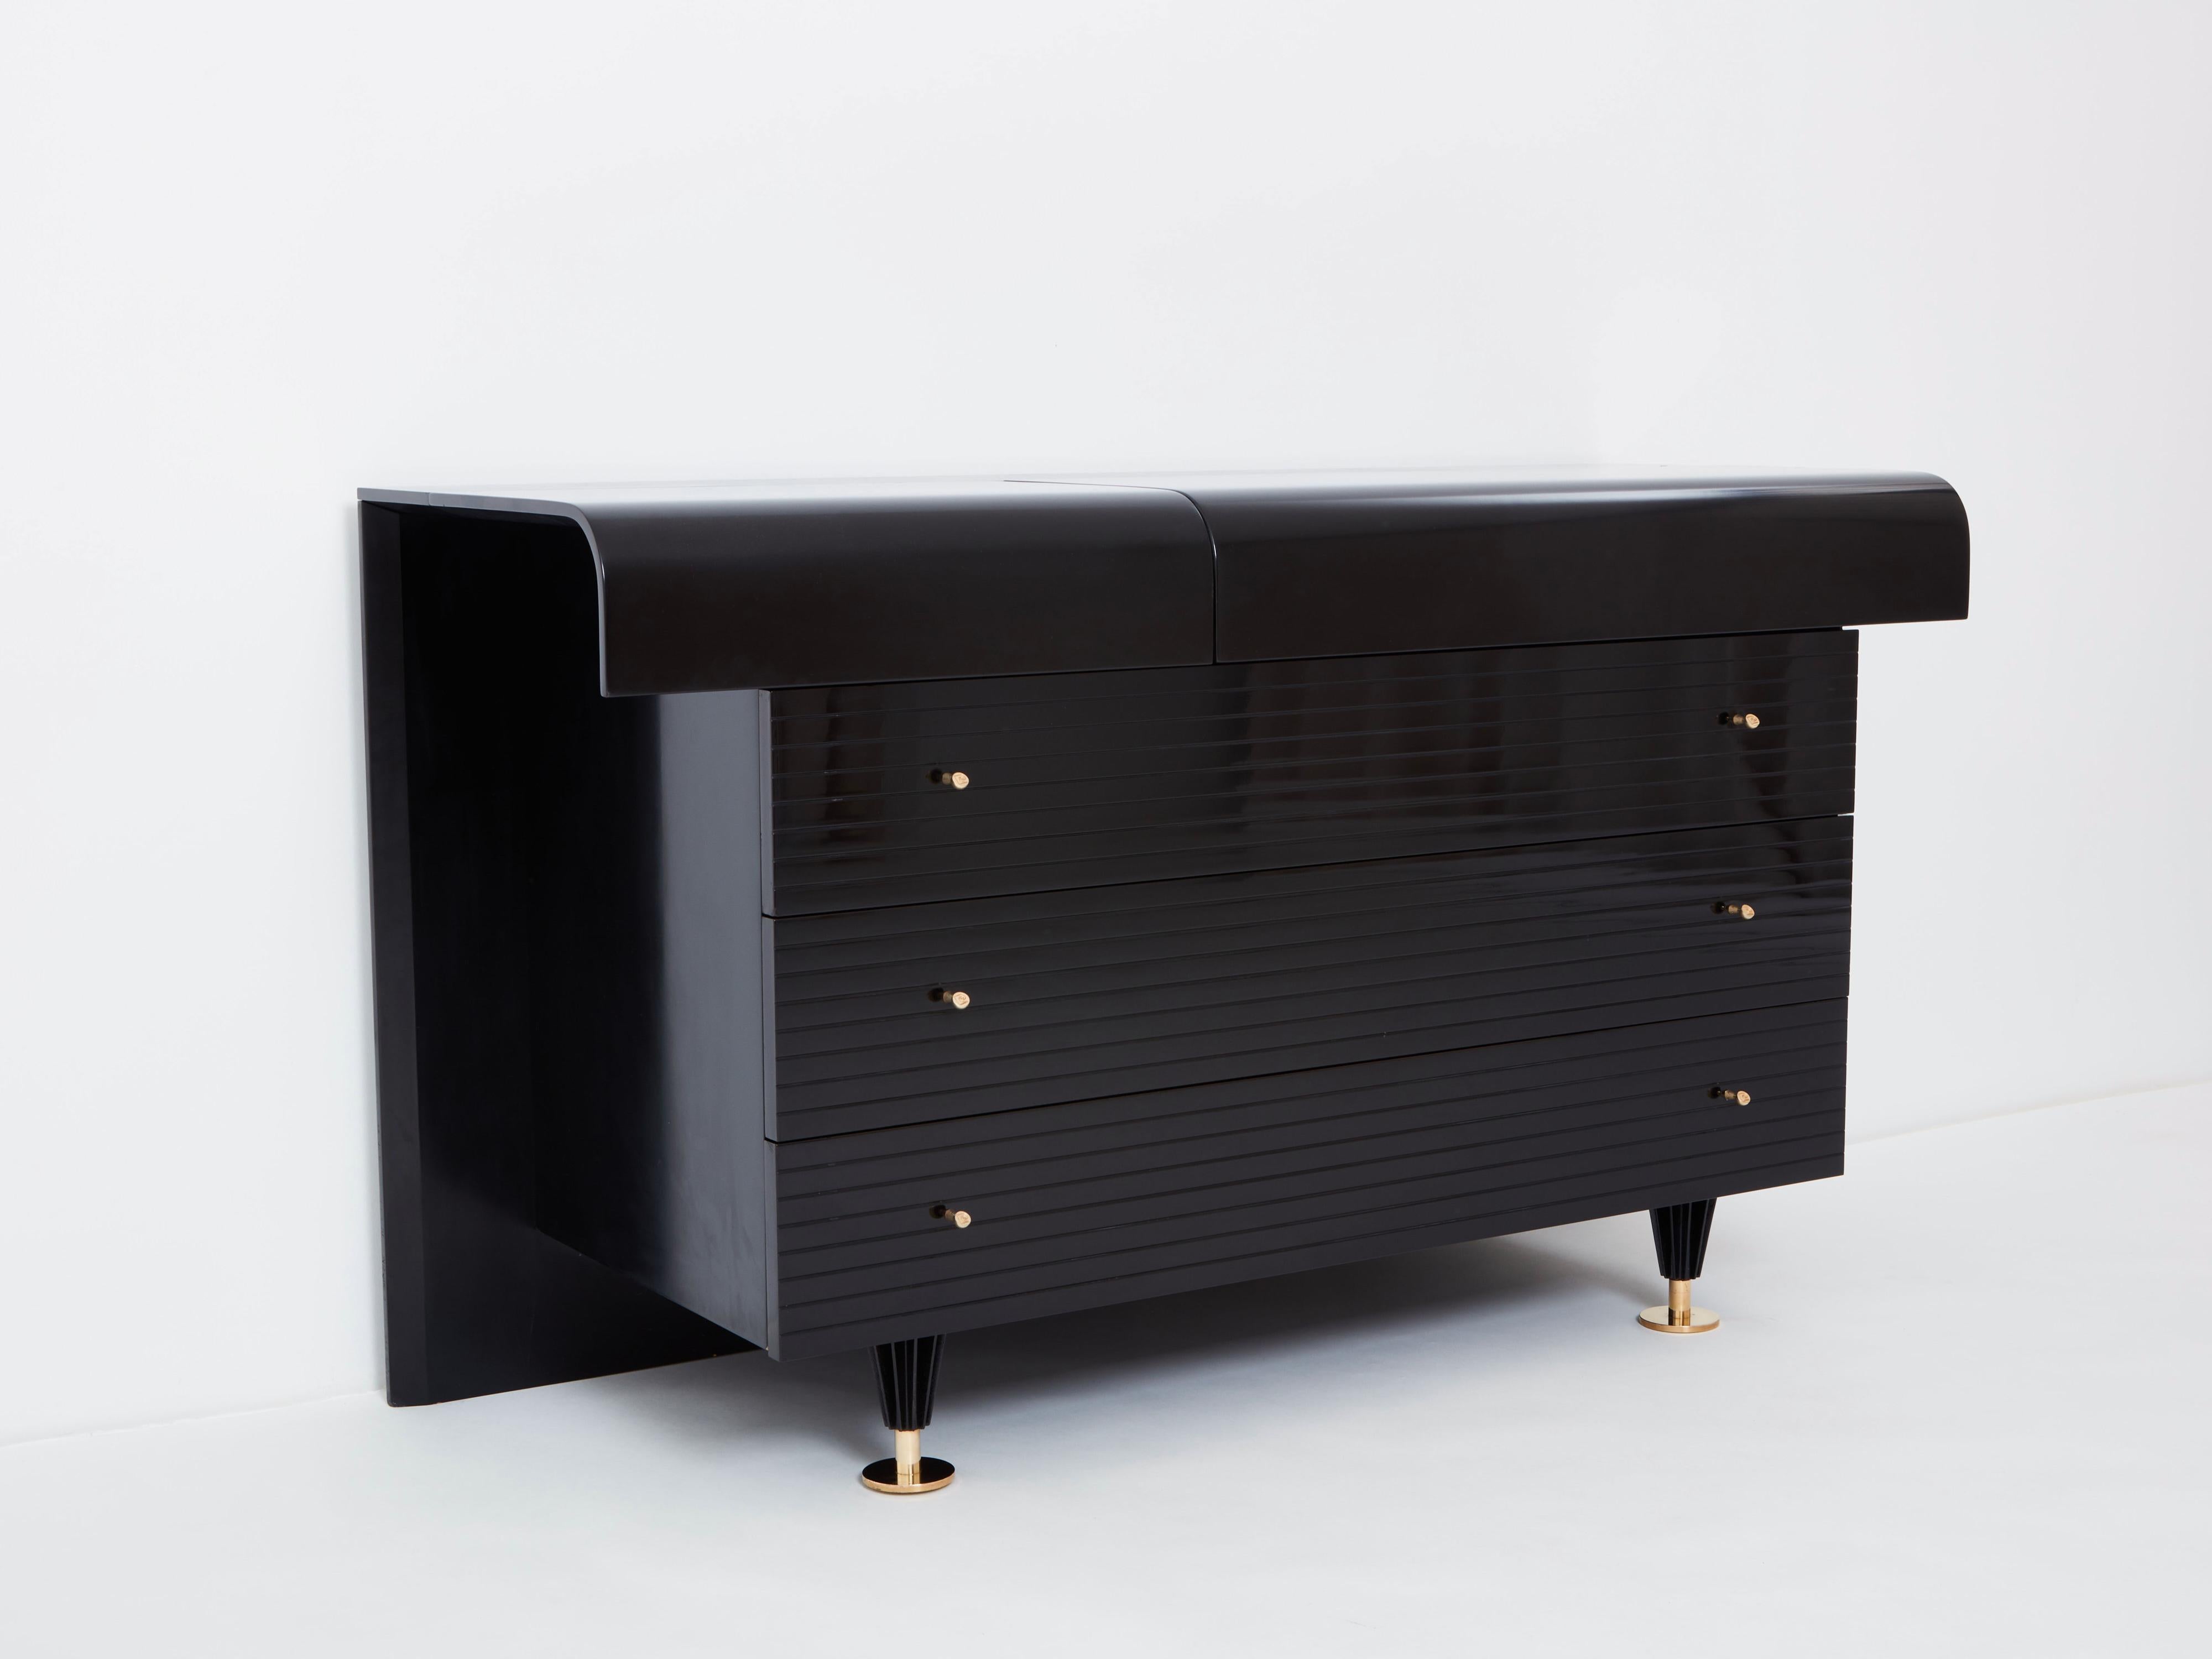 A timeless Pierre Cardin vintage piece made in the 1980s, this French commode feels imposing and glamourous, with a playful mix of straight lines and rounded shape, and brass handles and feet adorning its exterior of reflective black lacquer. Glossy